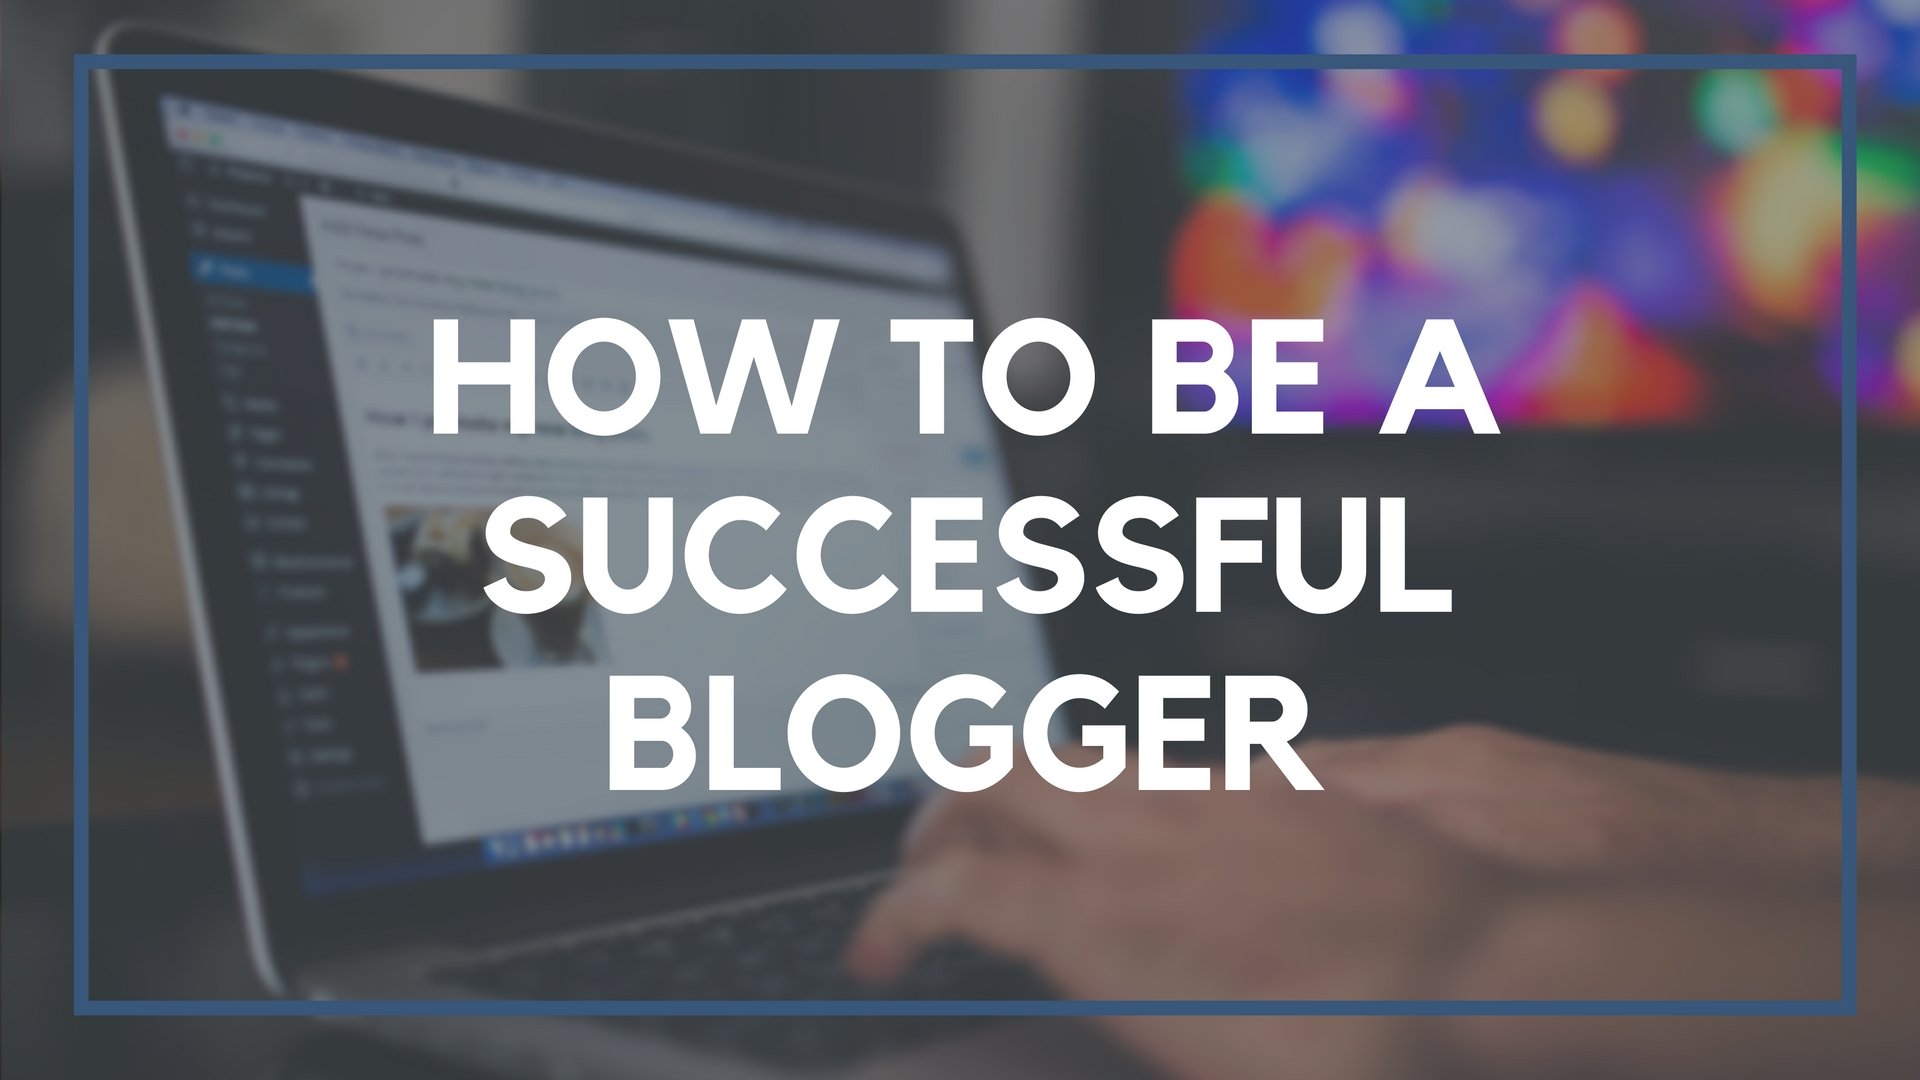 How to Be a Successful Blogger